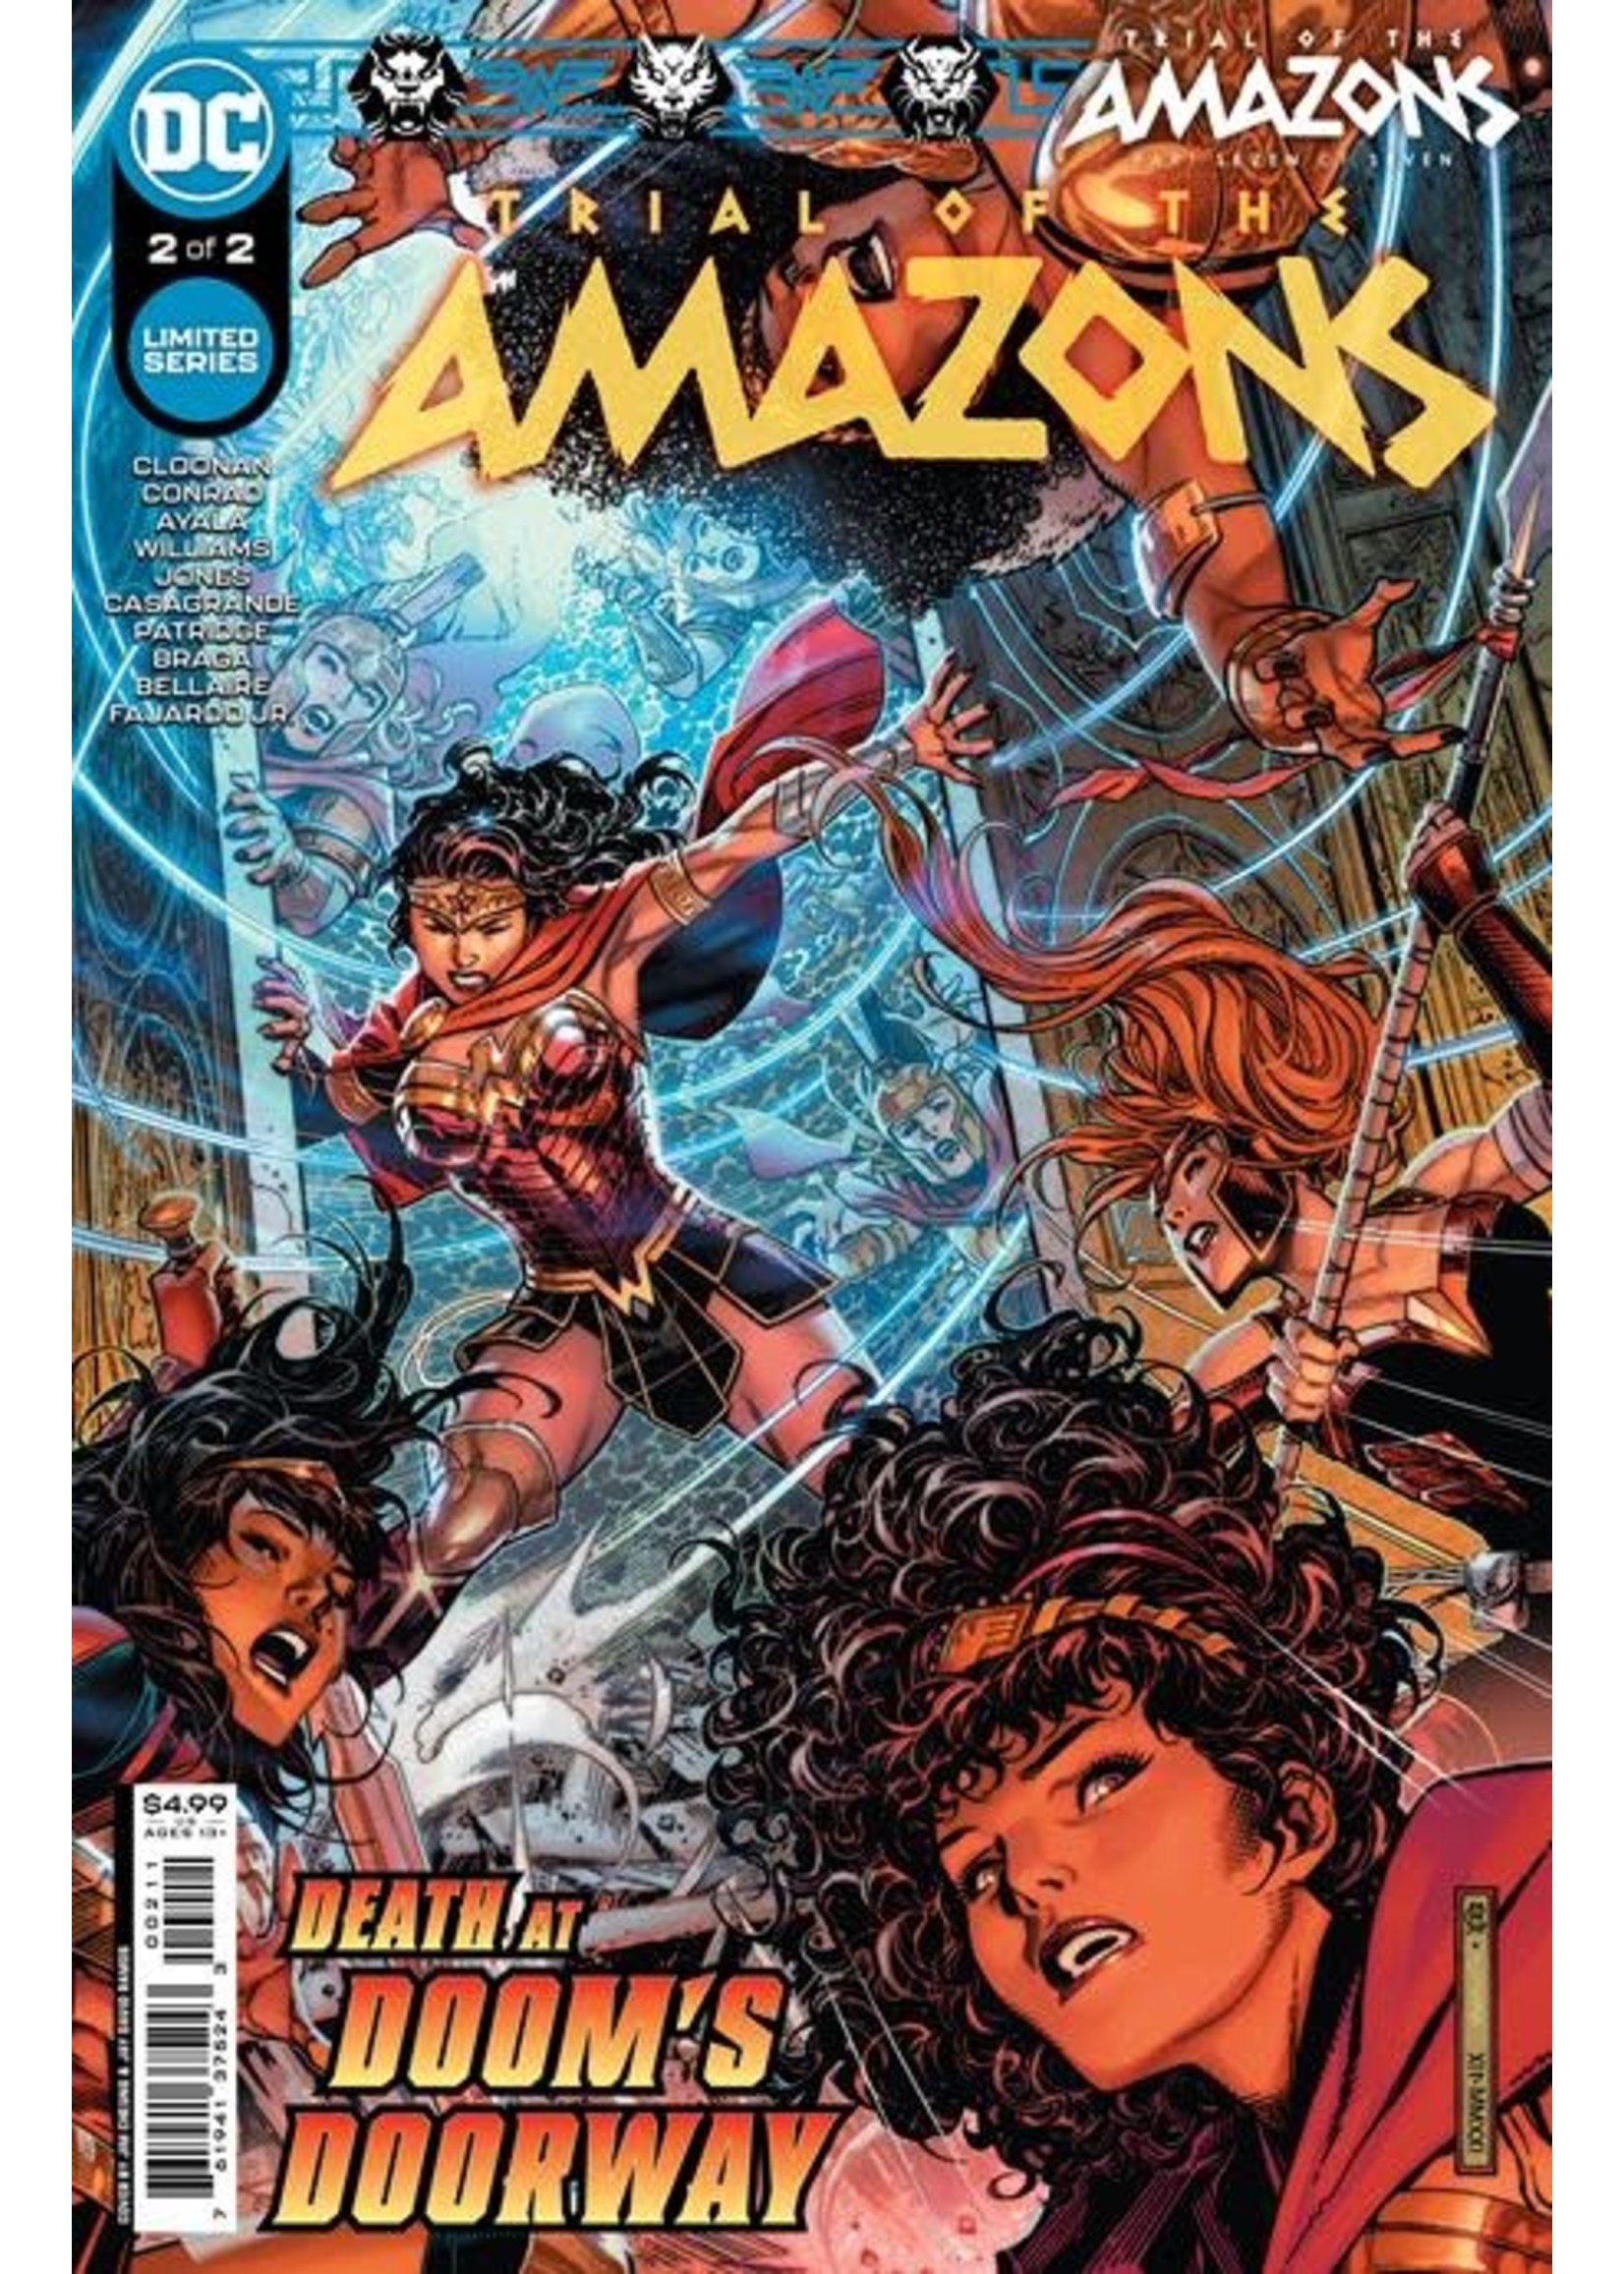 DC COMICS TRIAL OF THE AMAZONS #2 (OF 2) CVR A JIM CHEUNG